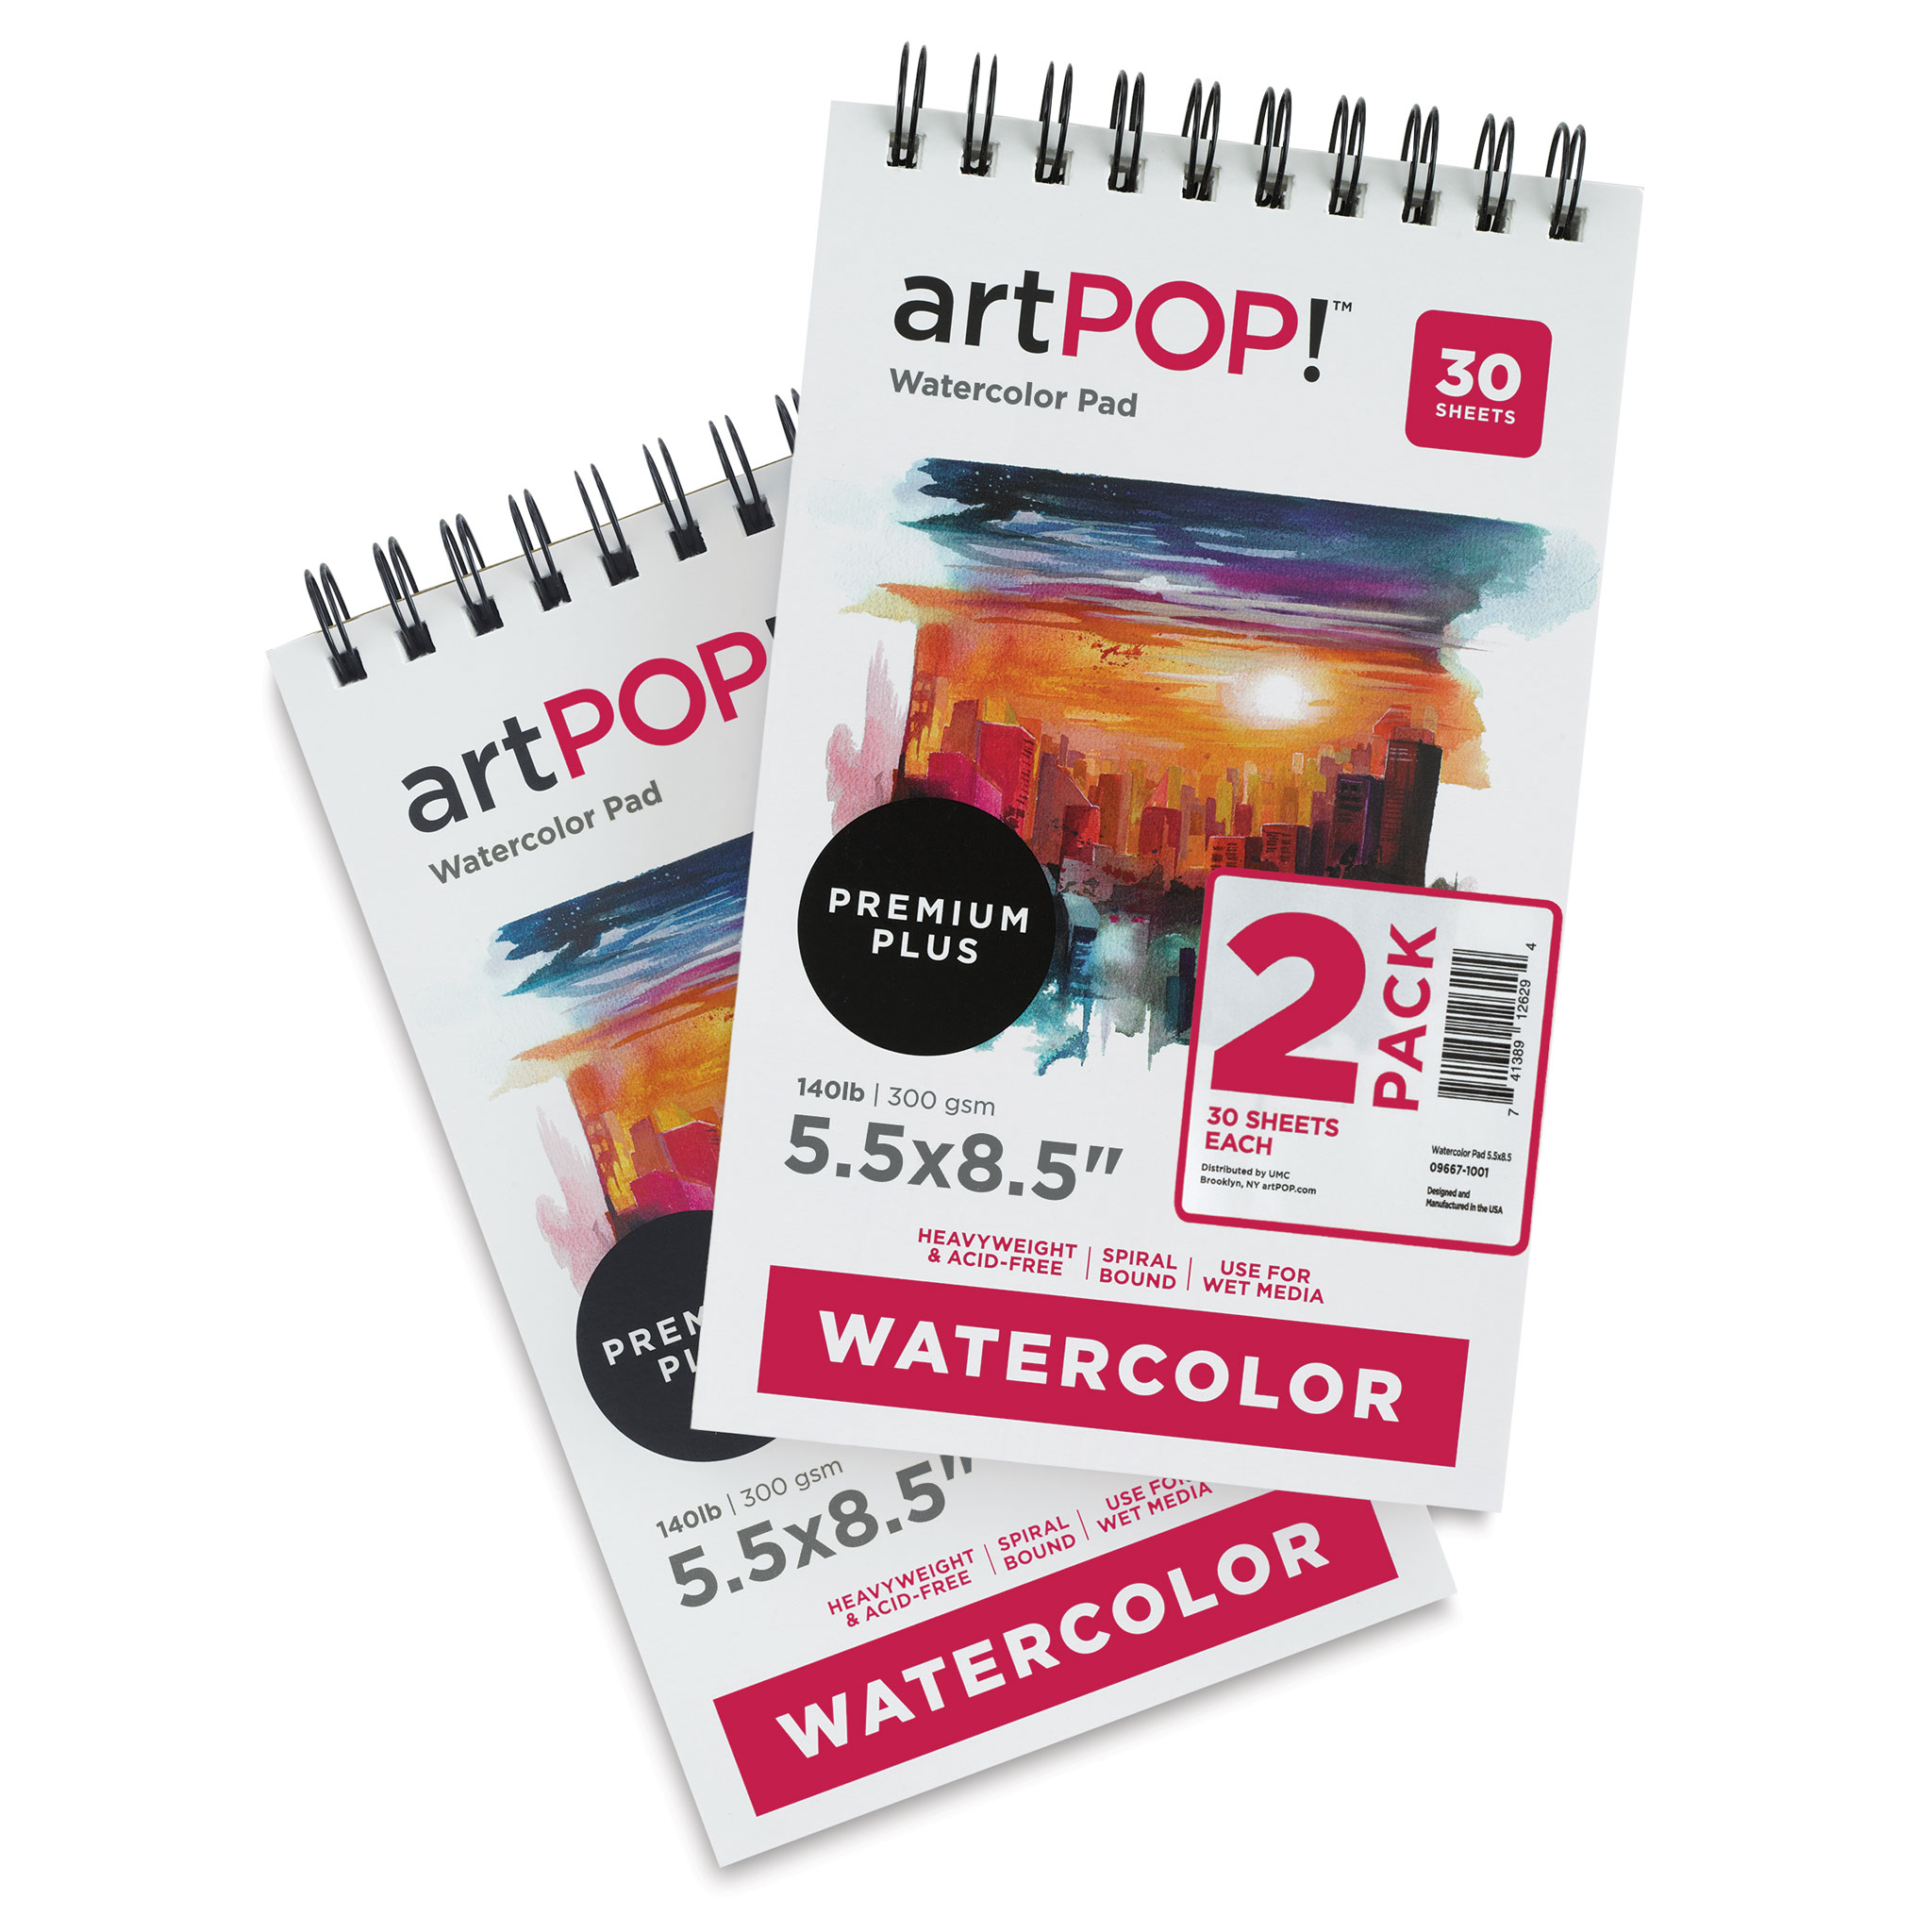 U.S. Art Supply 5.5 x 8.5 Premium Heavyweight Watercolor Painting Paper Pad, Pack of 3, 30 Sheets Each, 140lb (300gsm) - Spiral Bound, Cold